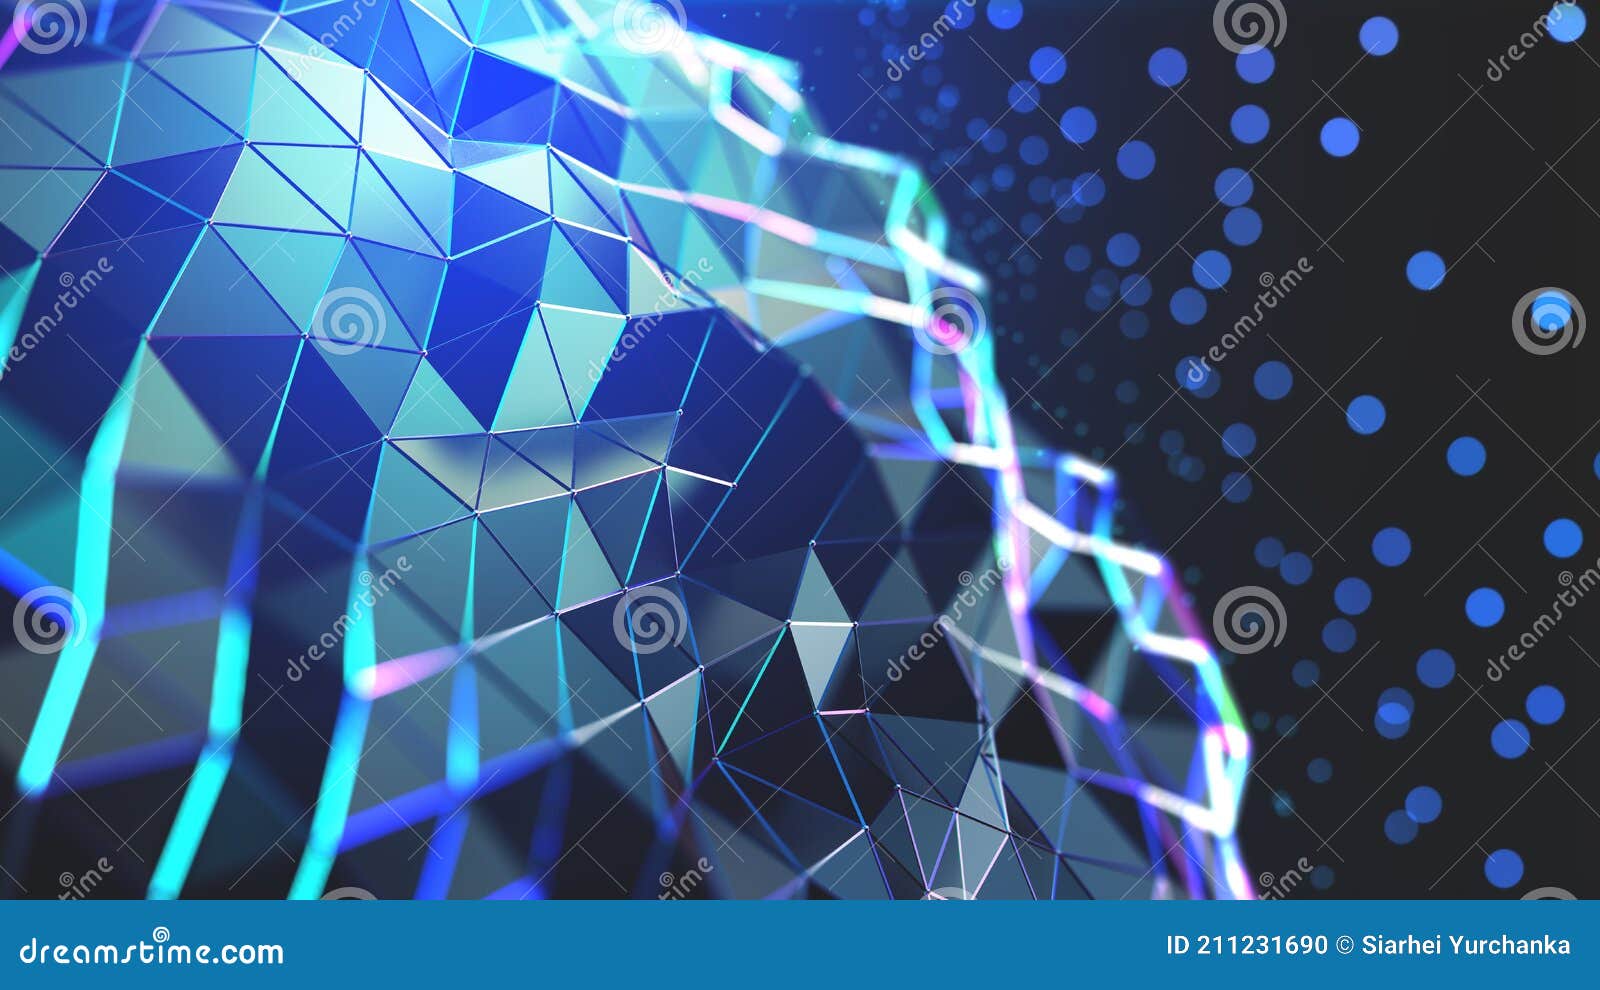 big data concept. bright, colorful 3d  of polygonal network, cybersecurity and internet busines